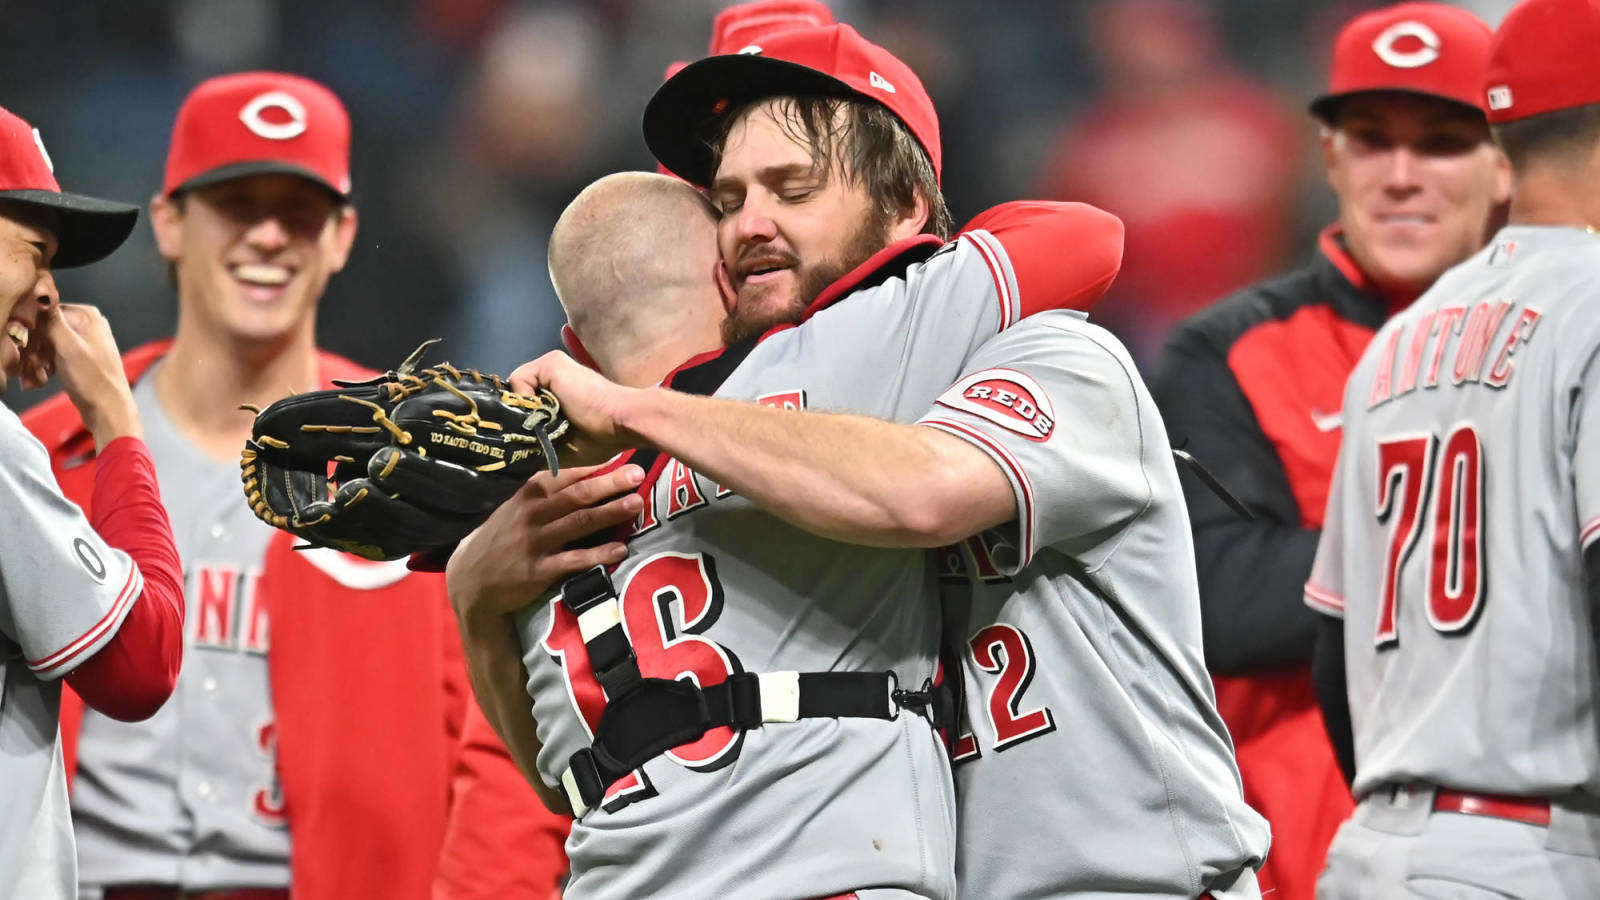 Wade Miley credits son’s good-luck tattoo for no-hitter